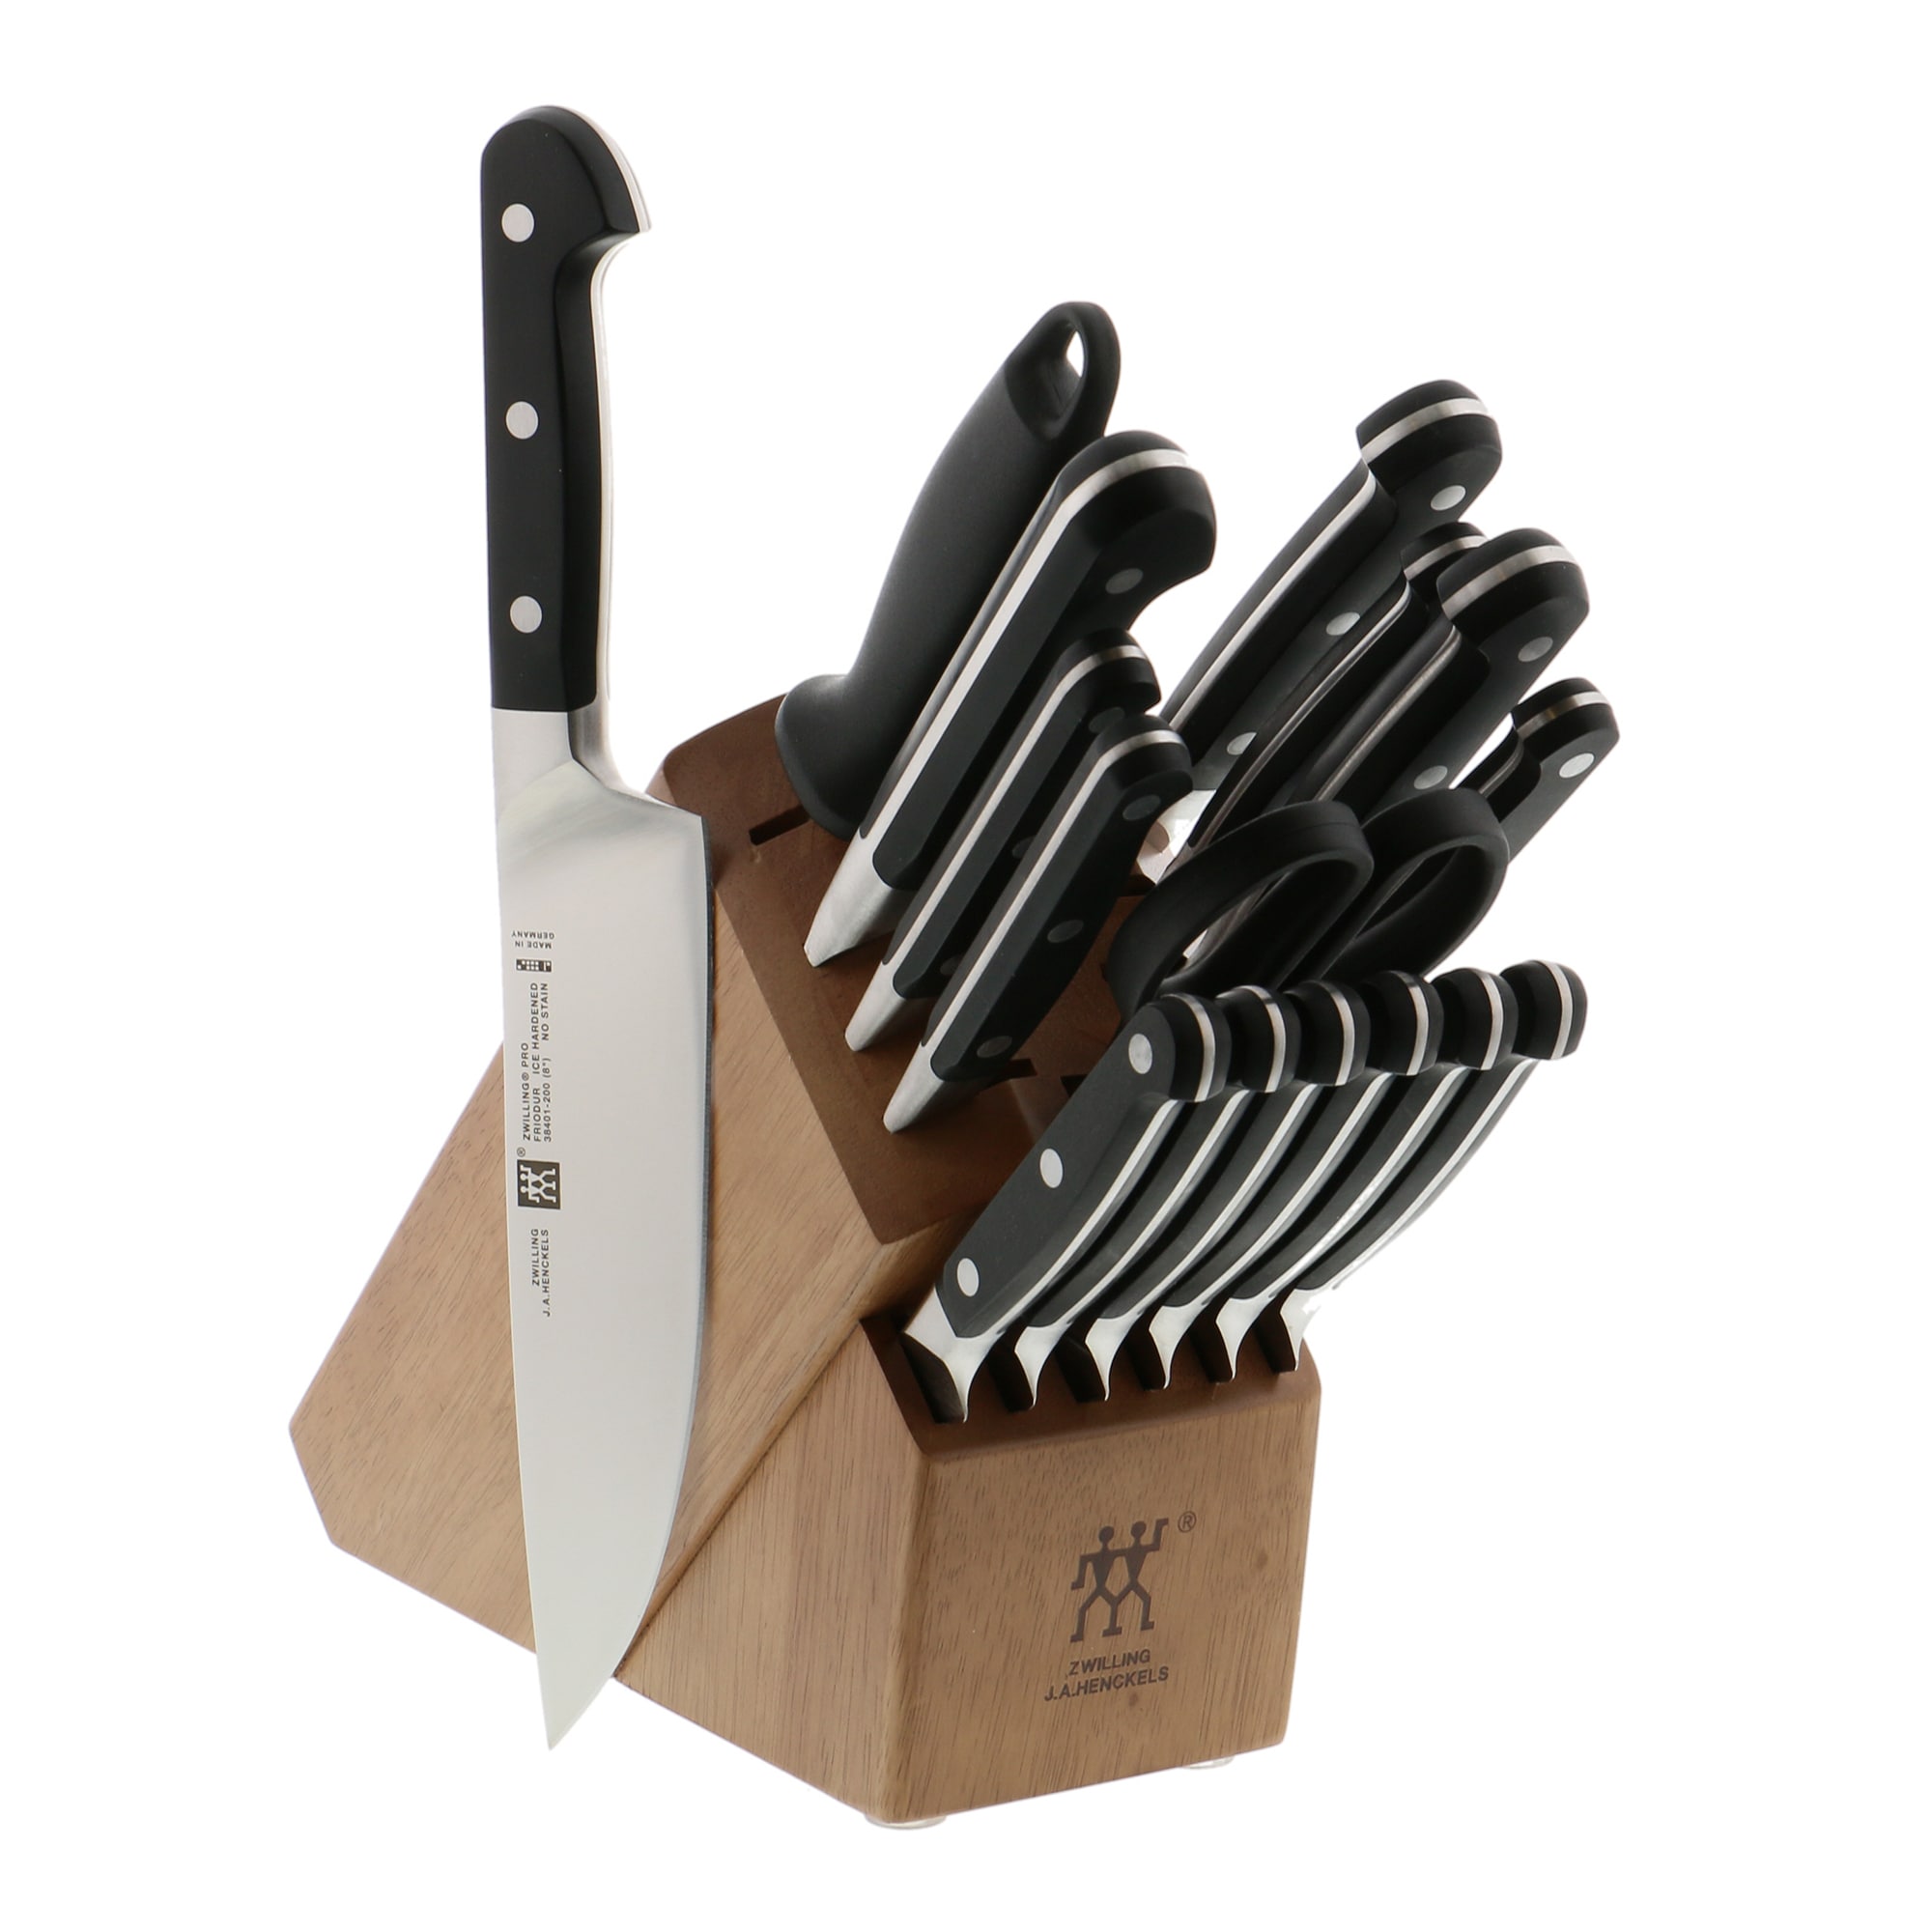 Zwilling ZWILLING Pro 17-pc Knife Block Set - Stainless Steel - Dishwasher  Safe - Includes Peeling, Paring, Utility, Santoku, Chef's, Bread Knives in  the Cutlery department at